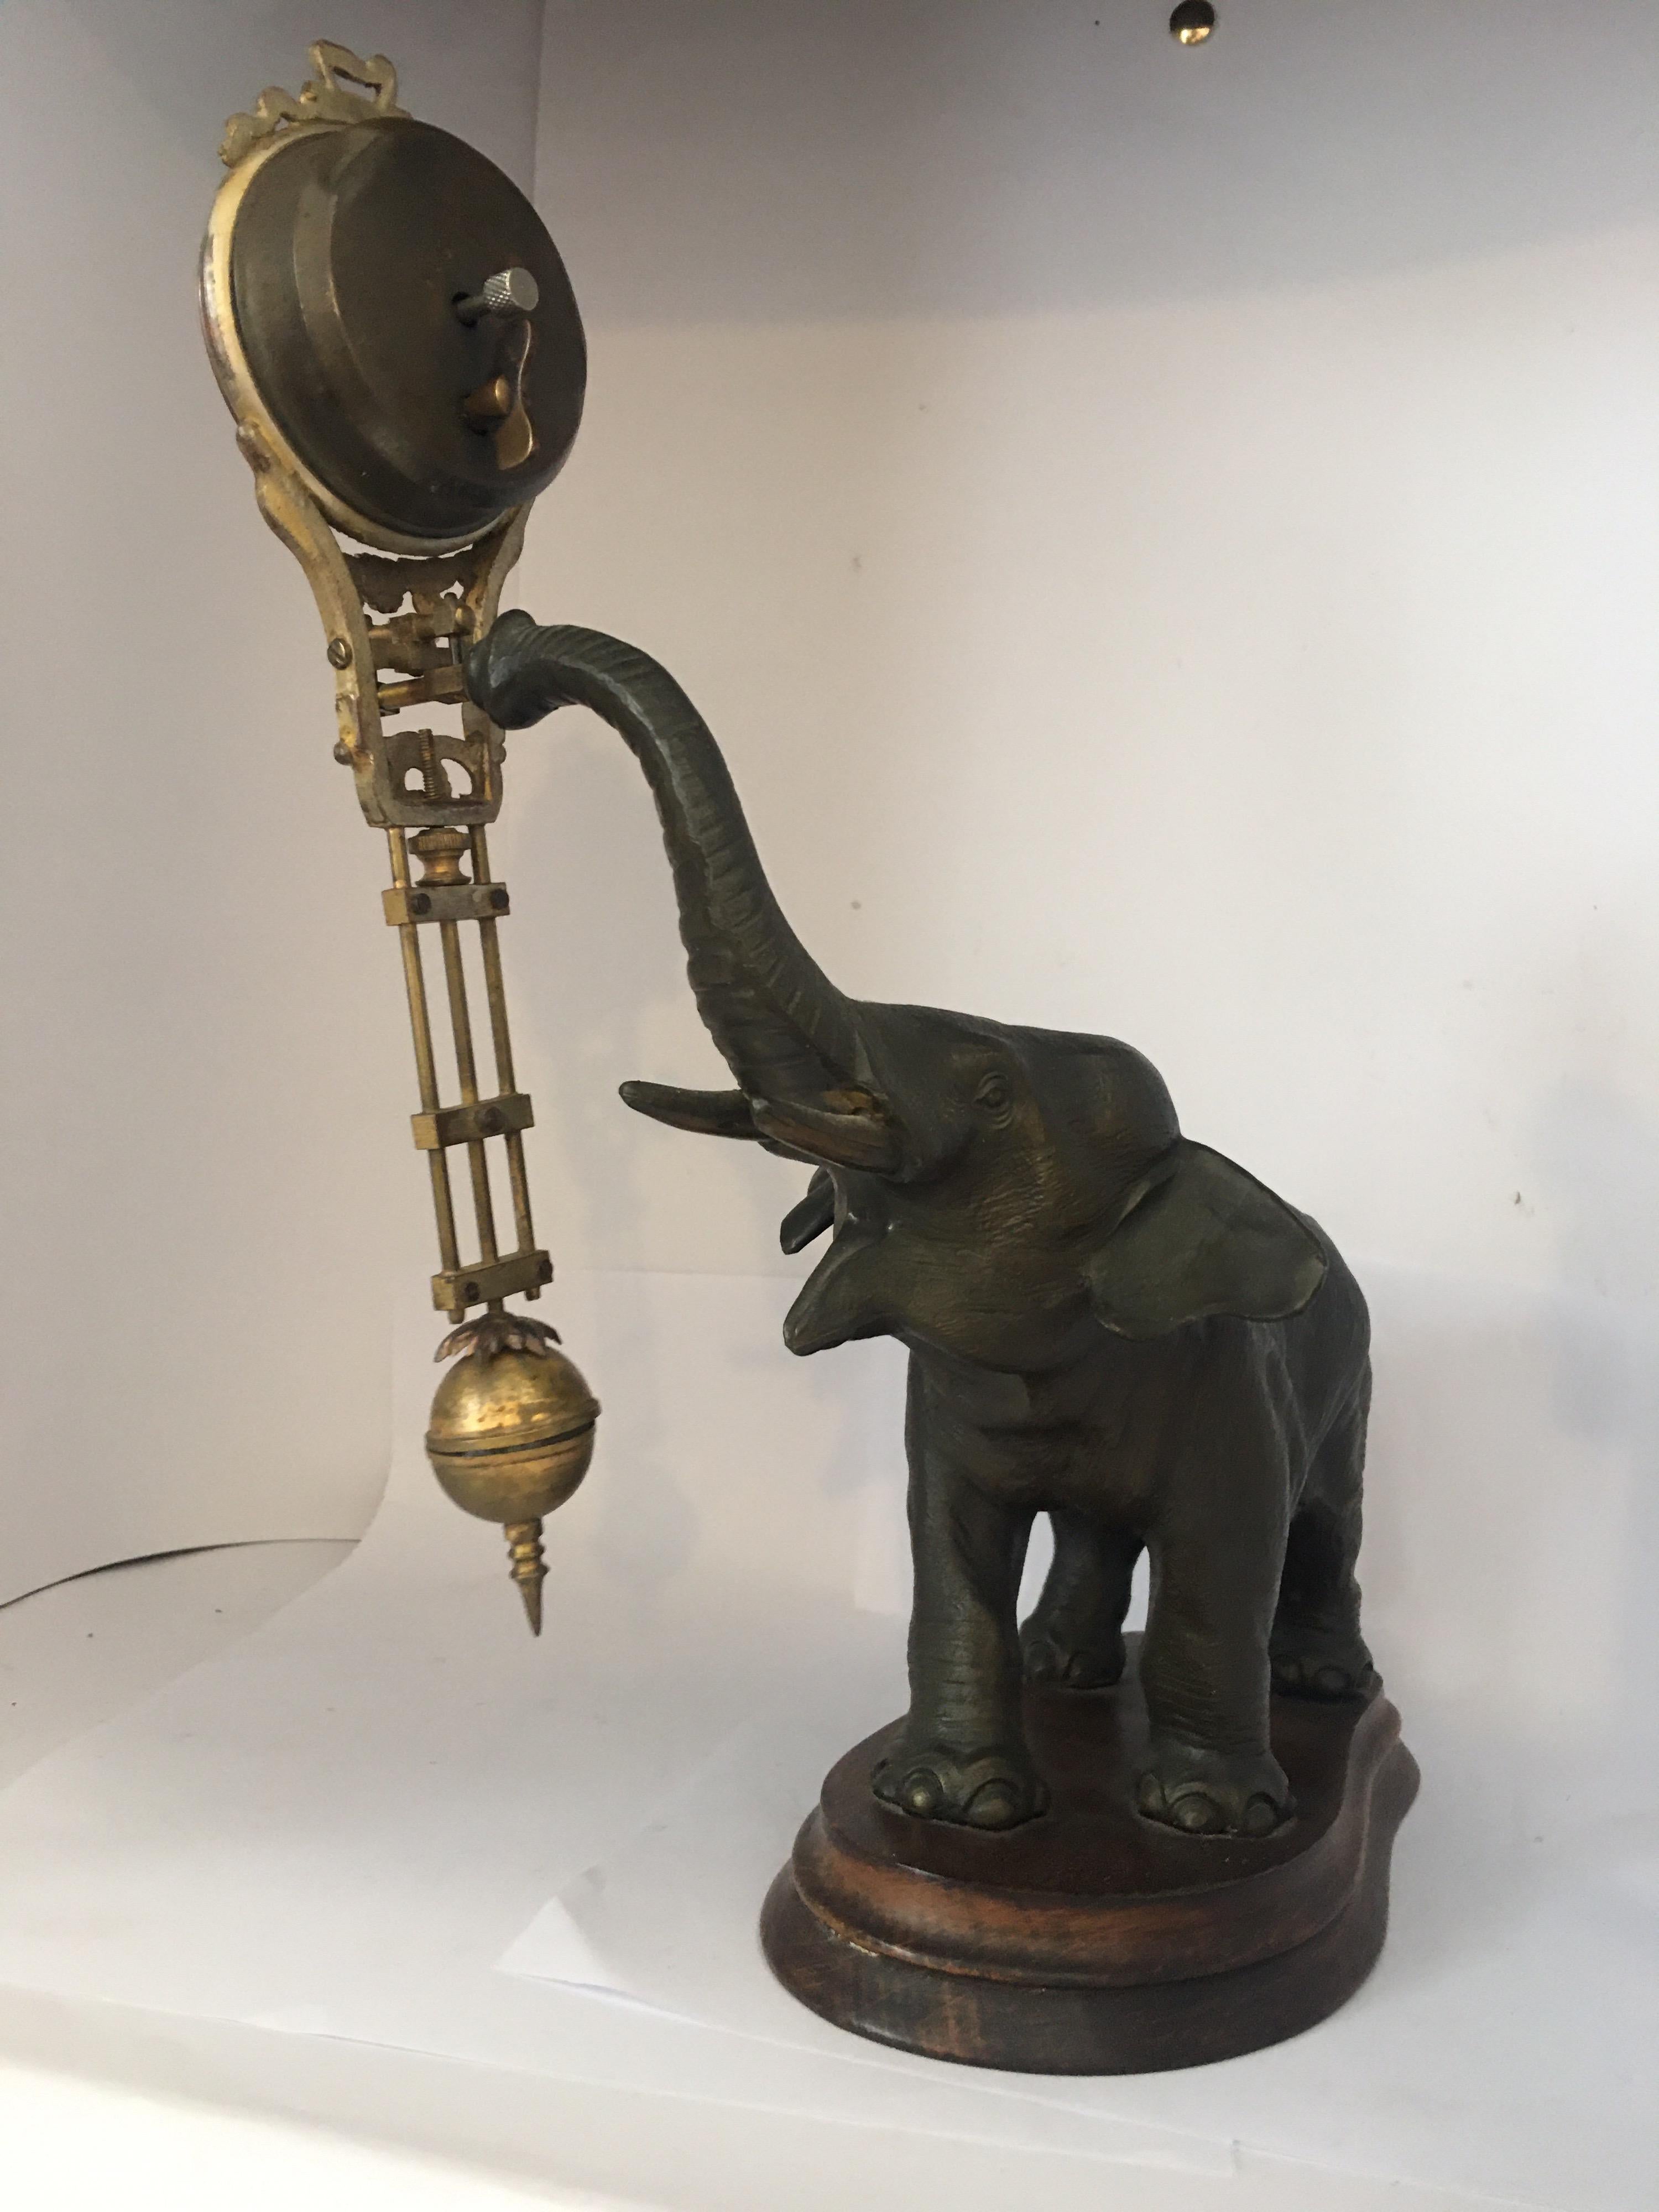 Antique Elephant Novelty Swinging Clock by Junghans For Sale 7